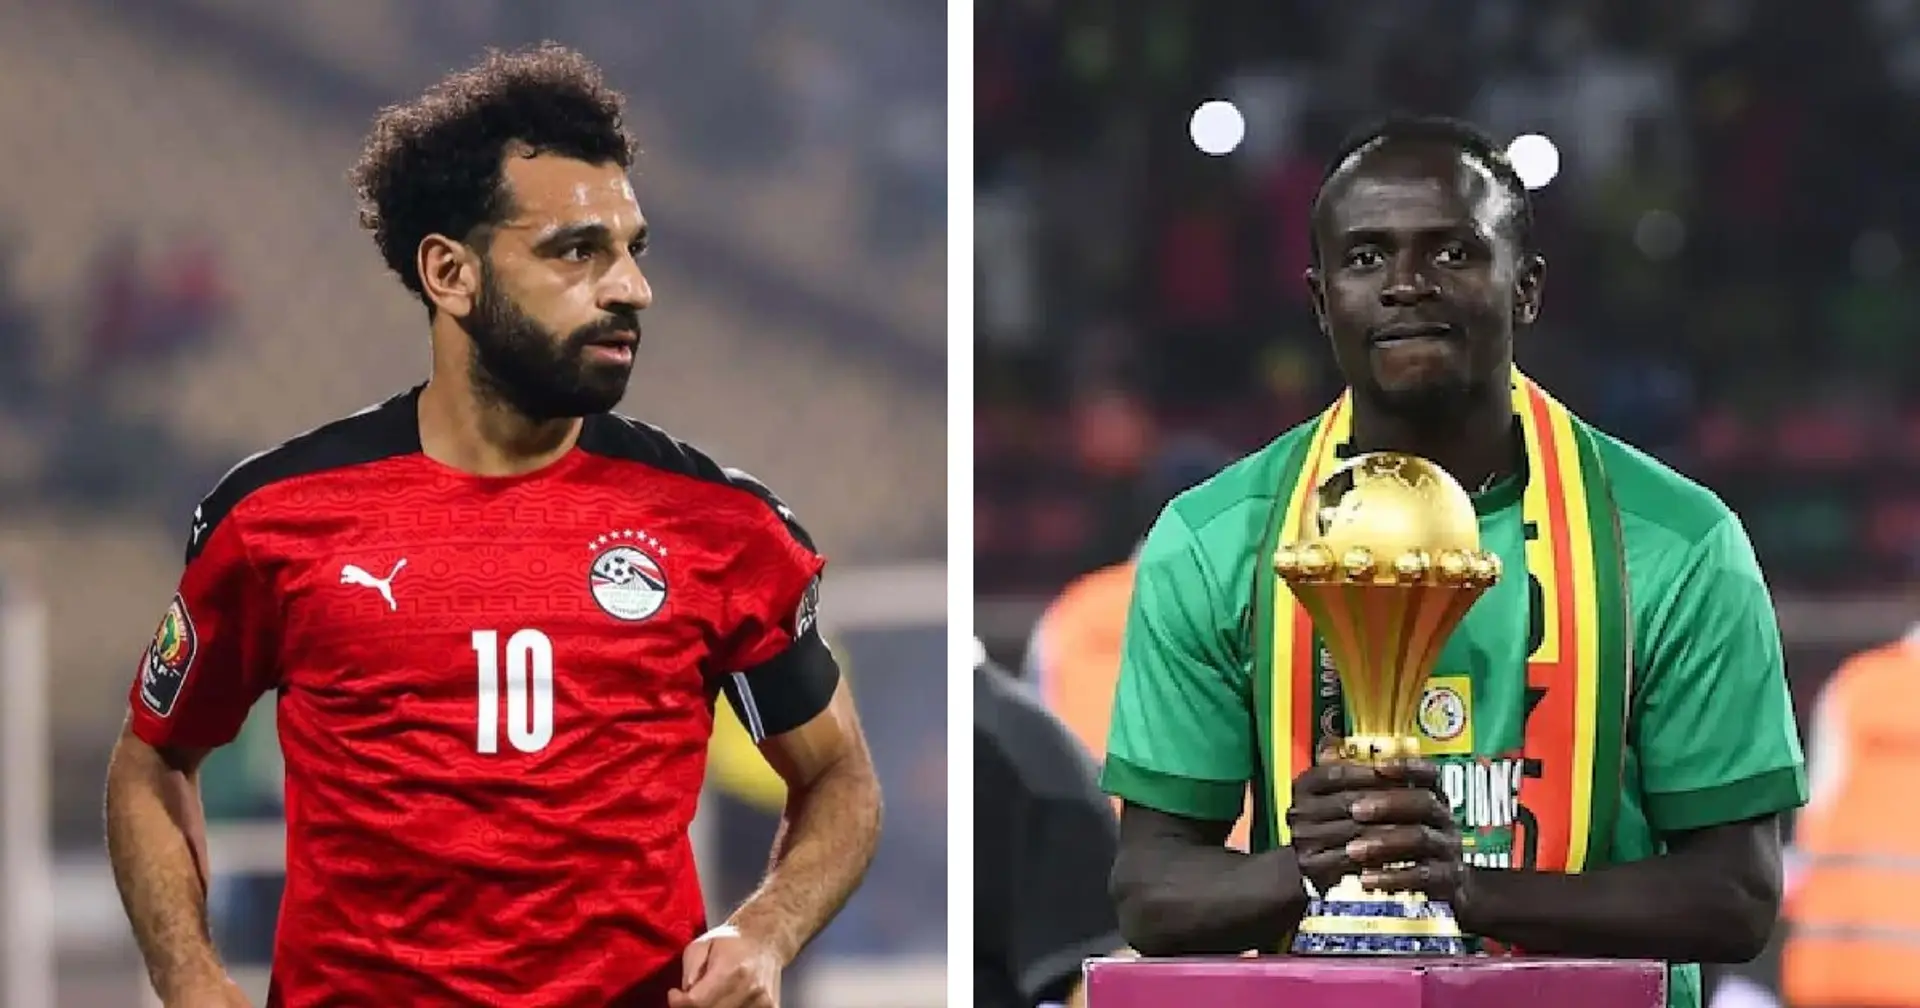 Salah's Egypt takes on Mane's Senegal once again - ticket to World Cup 2022 at stake